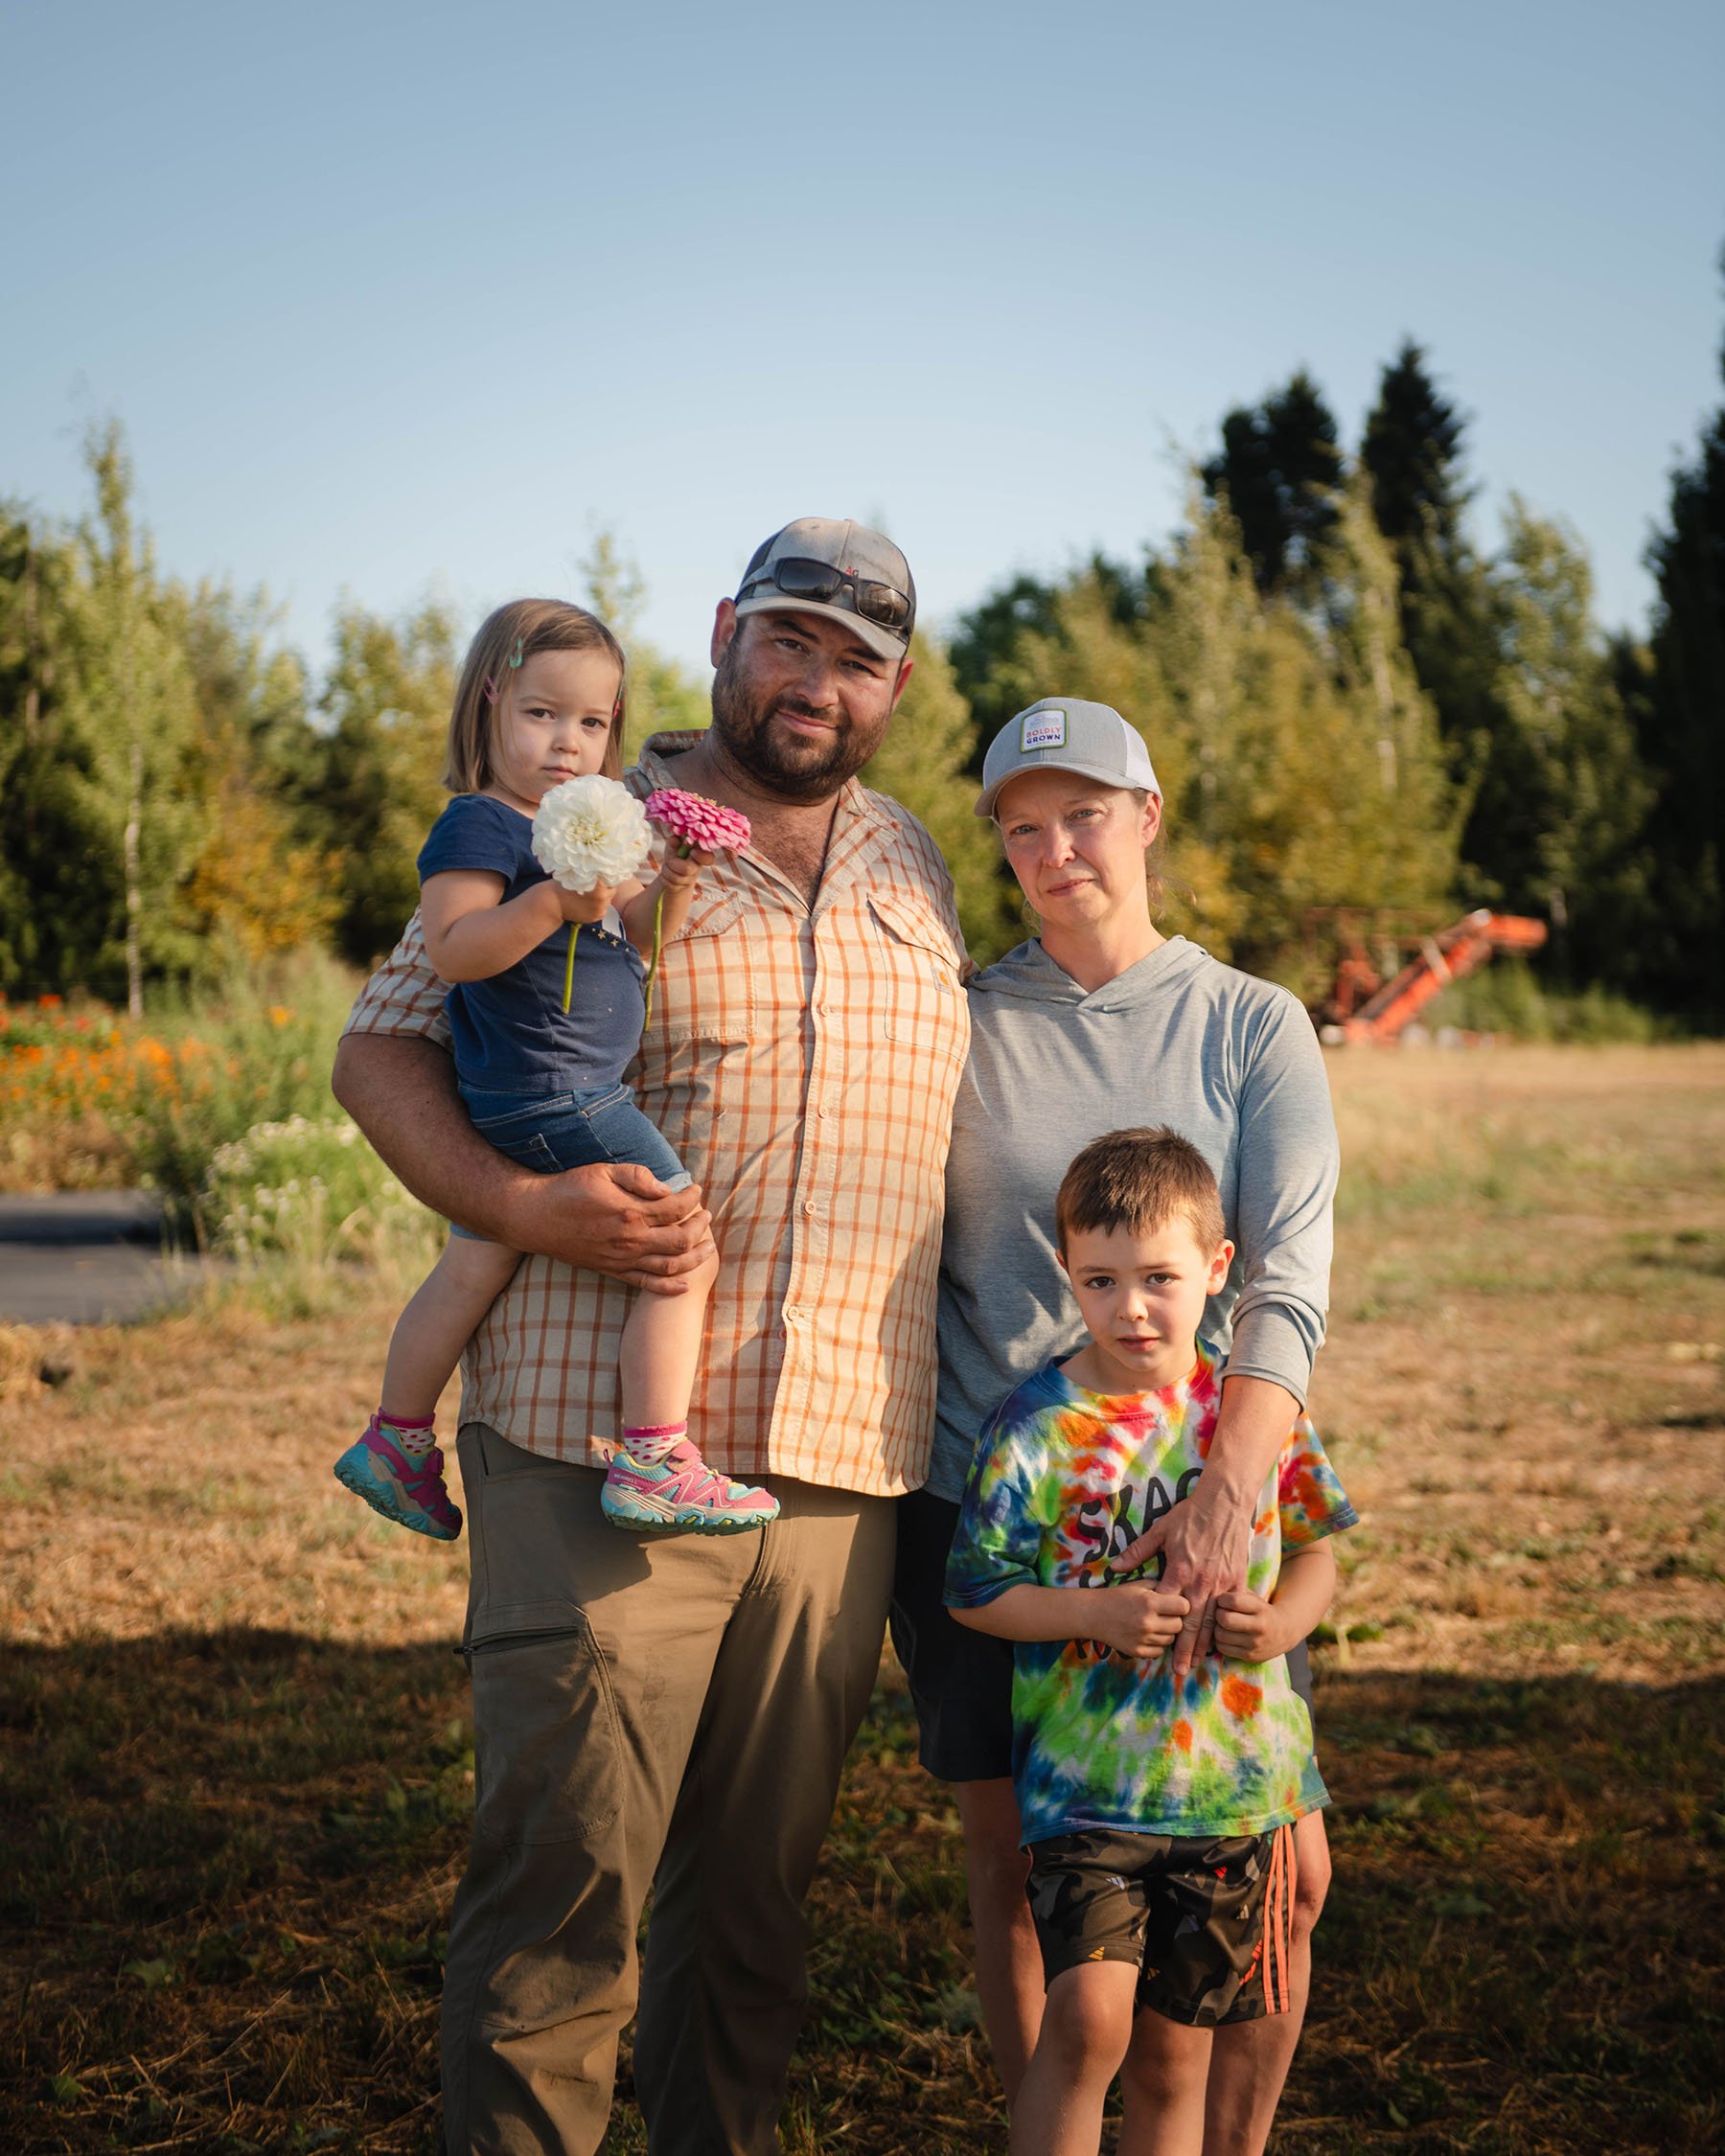 Amy Frye poses with her husband Jacob Slosberg and their children Leo and Ayla at their farm.